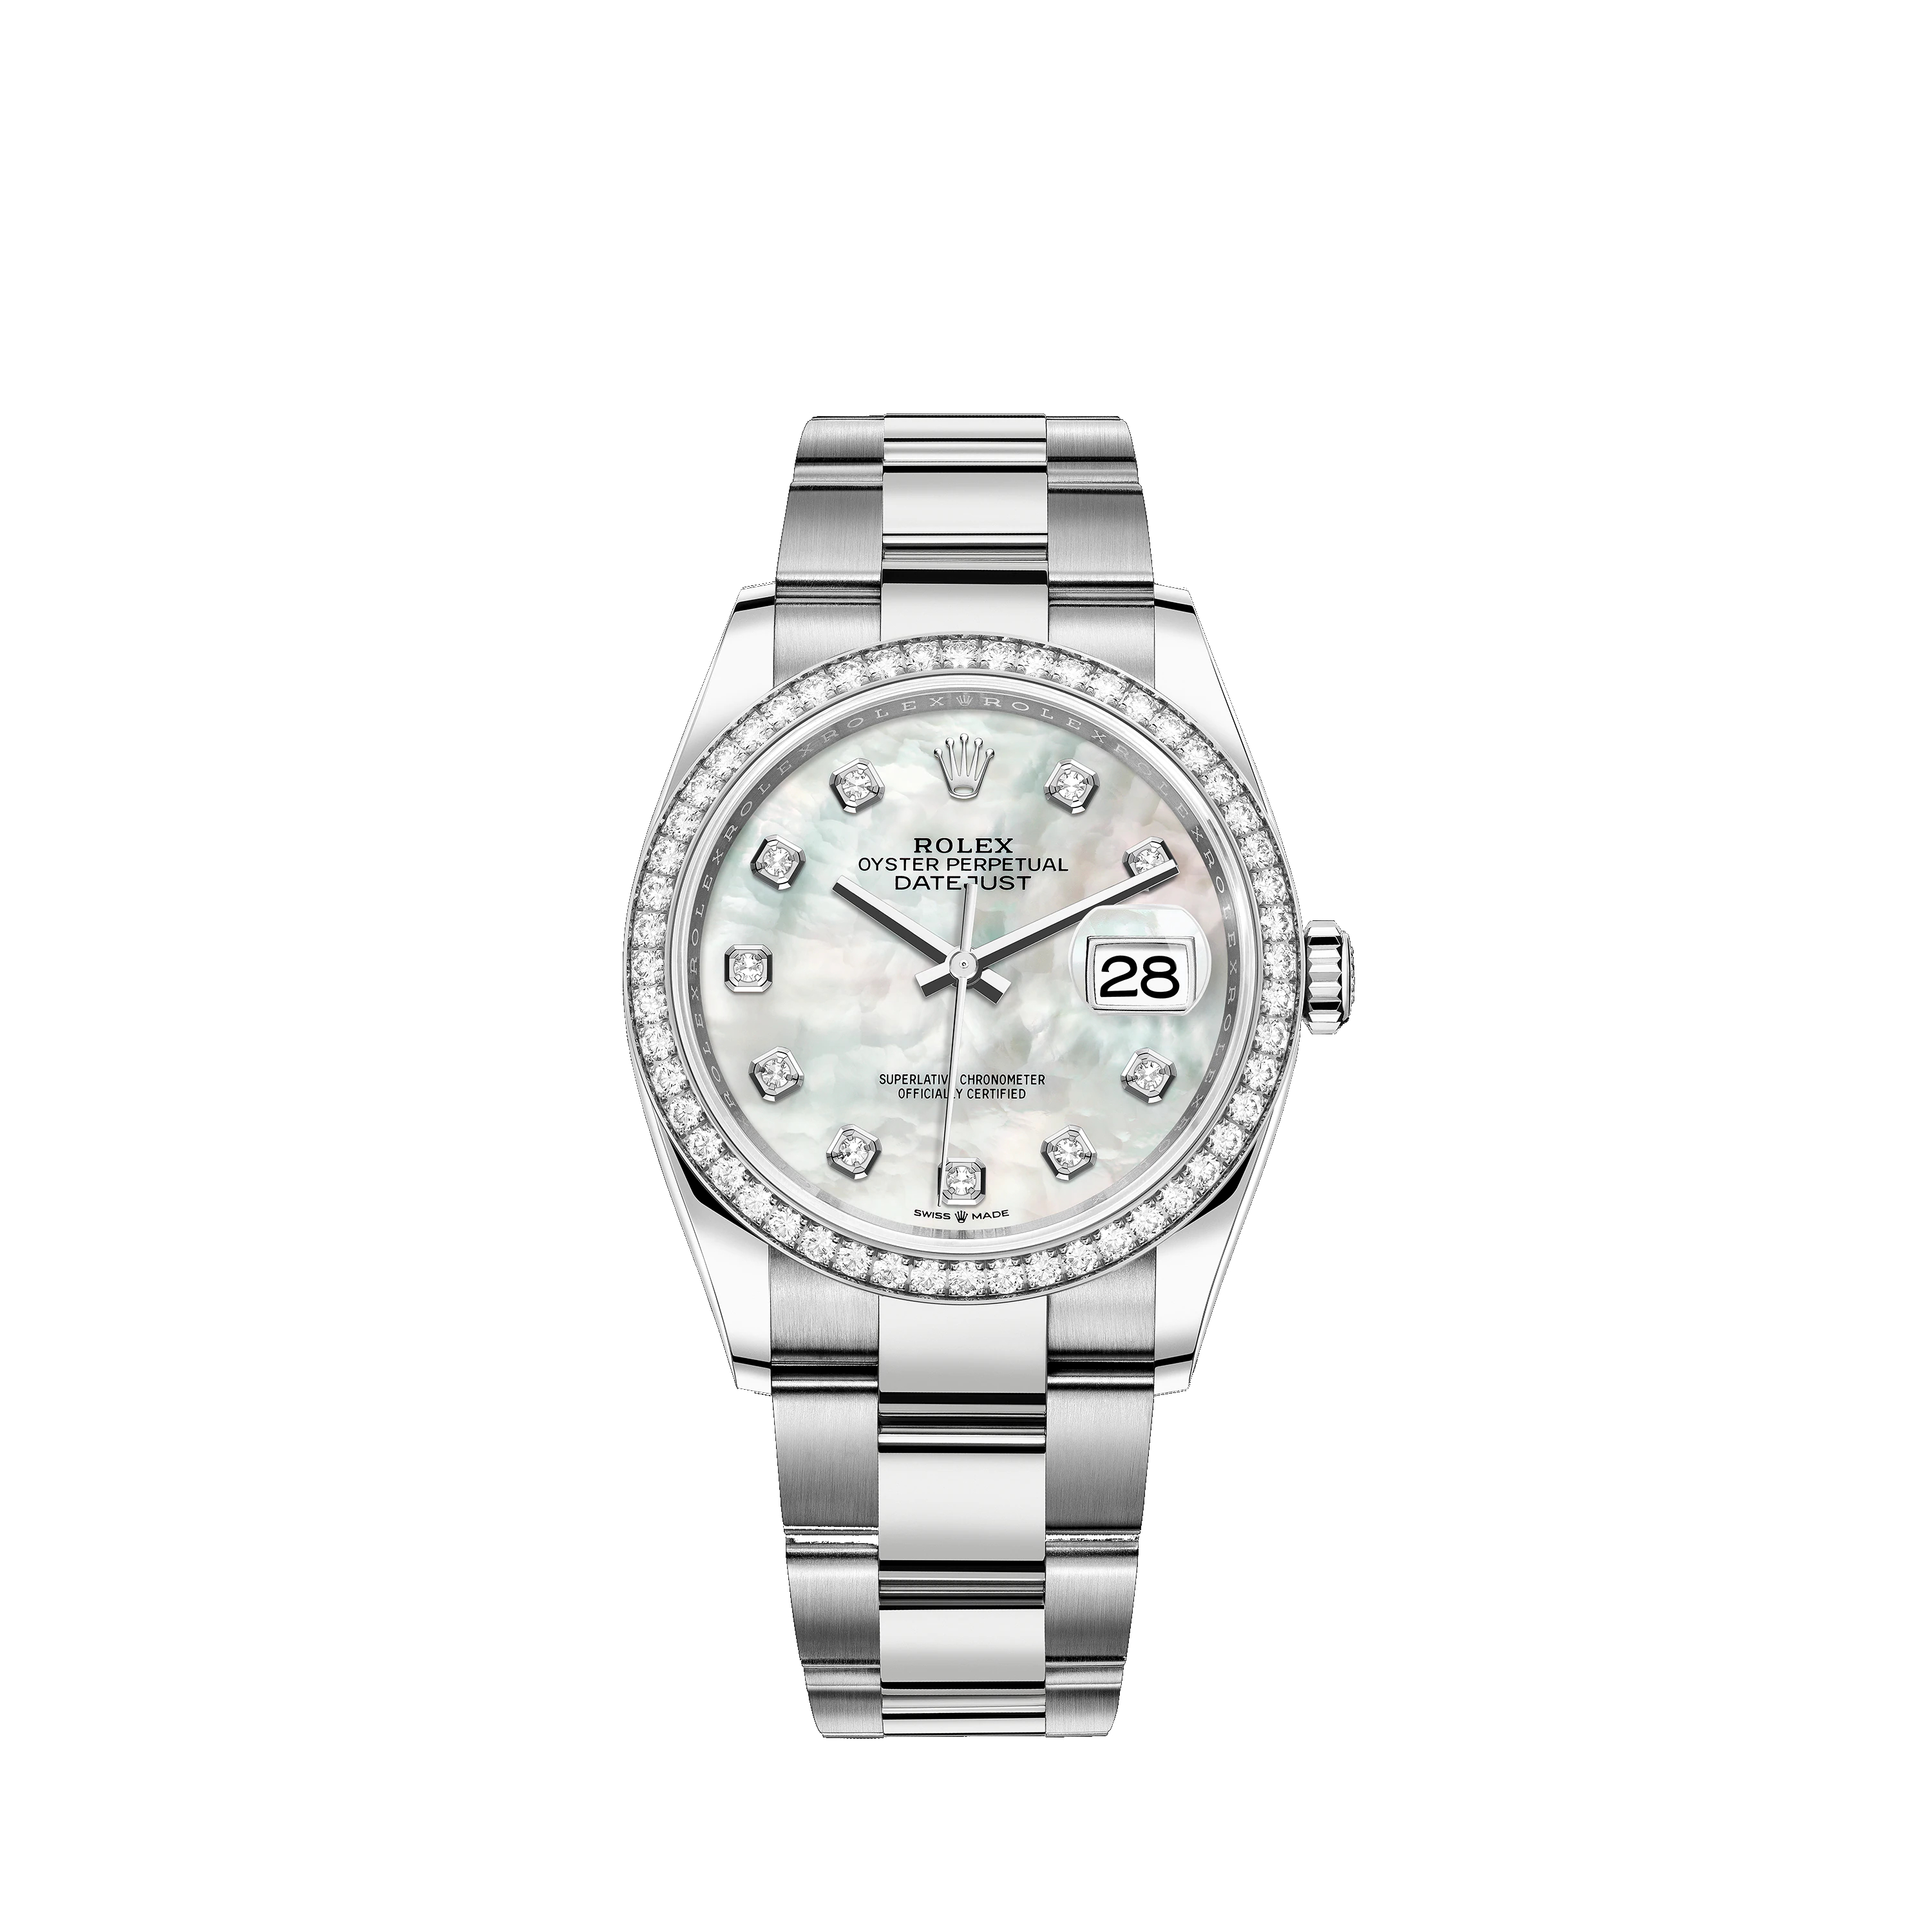 Datejust 36 126284RBR White Gold, Stainless Steel & Diamonds Watch (White Mother-of-Pearl Set with Diamonds)